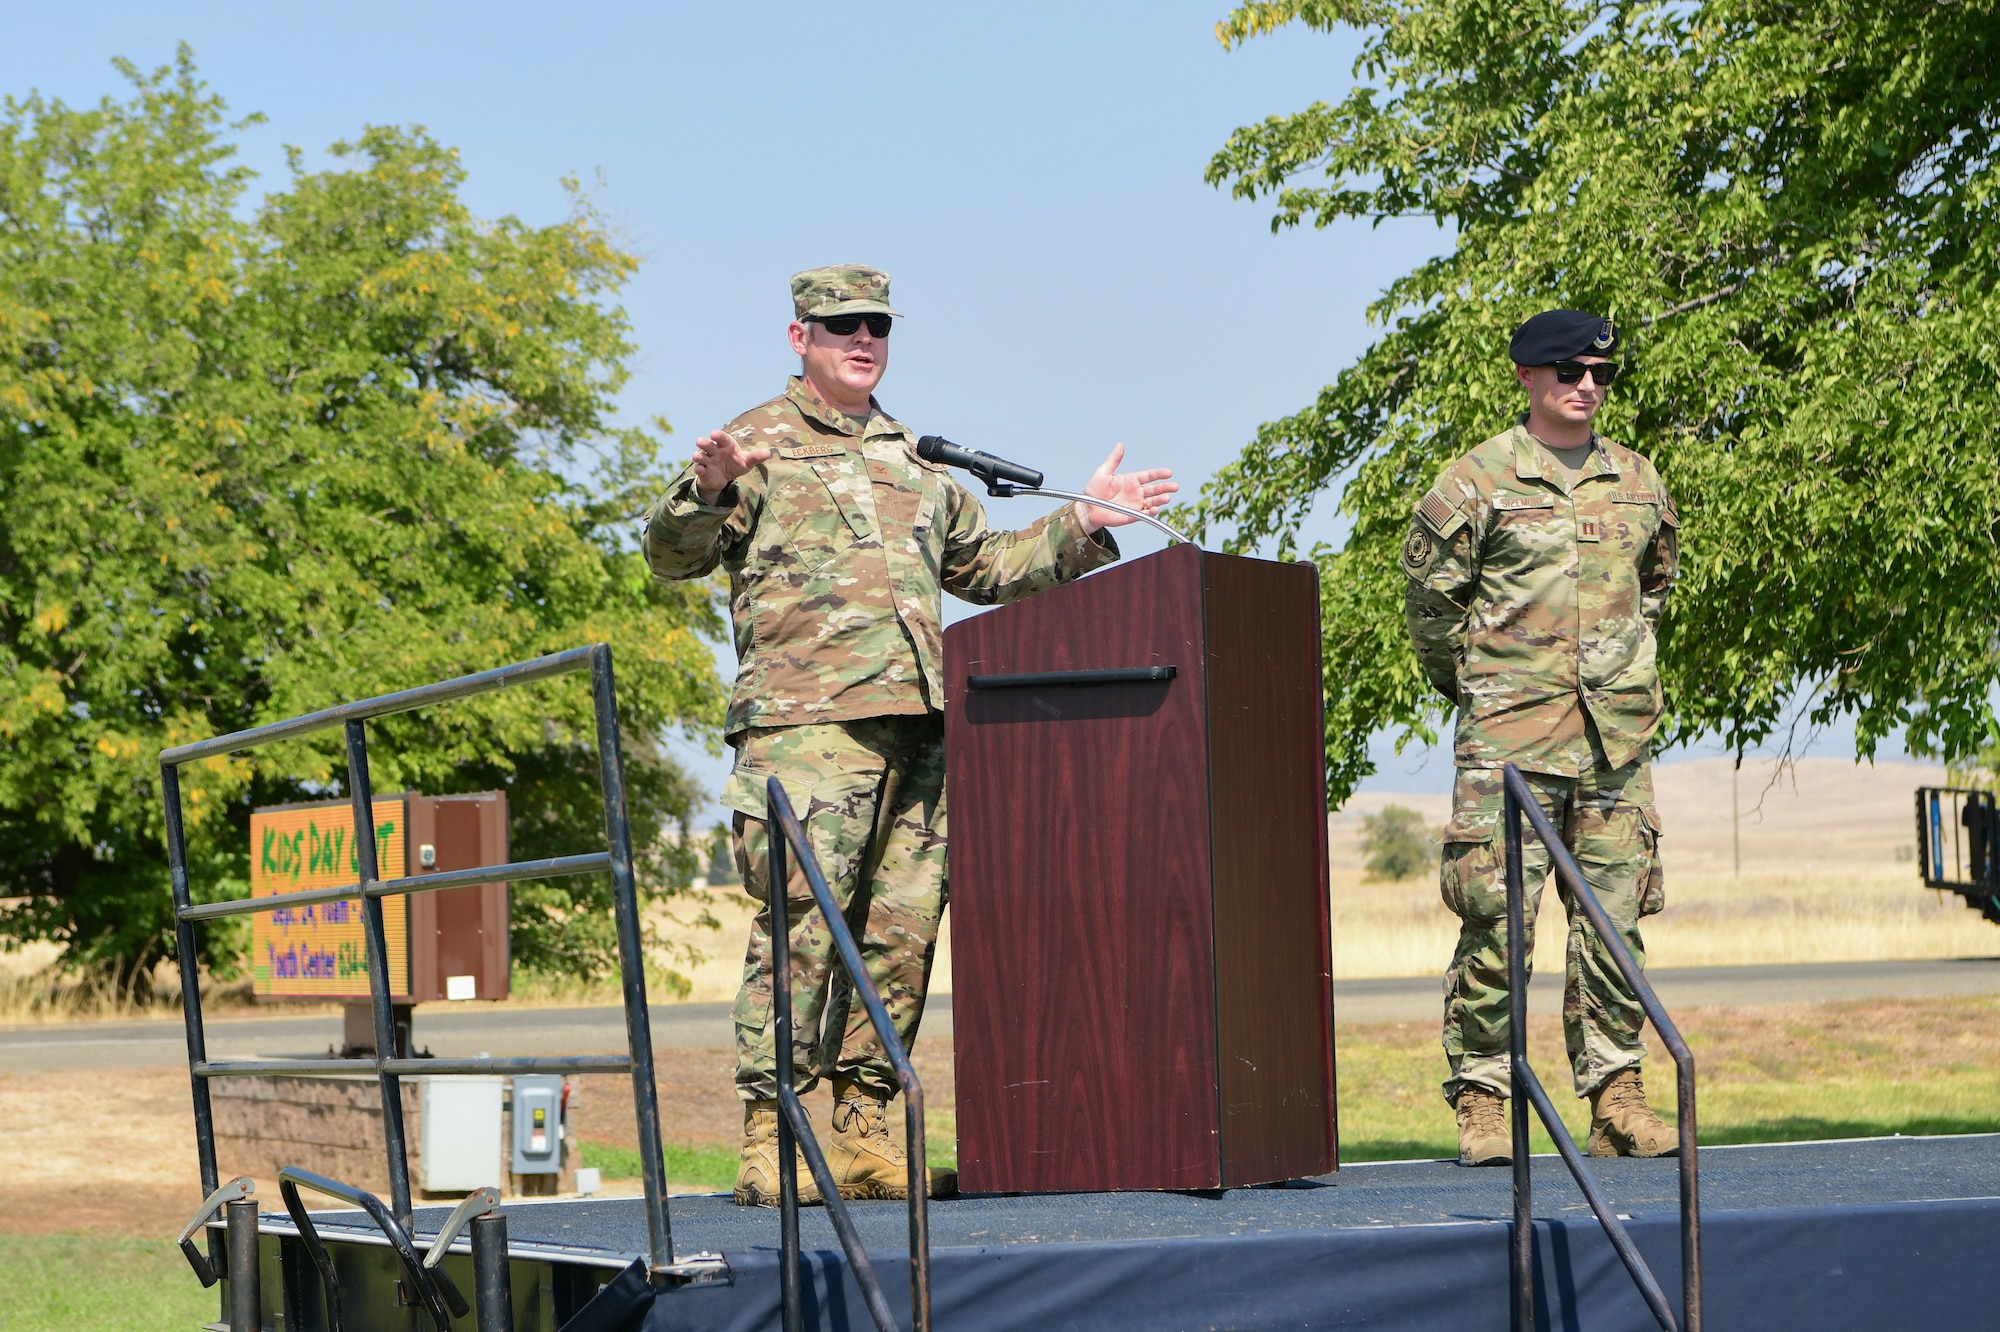 Col. Jason Eckberg, 9th Reconnaissance Wing Vice Commander, speaks at the opening ceremony for Recce Connect Day at Beale Air Force Base, Cali. on Sept. 16, 2022.